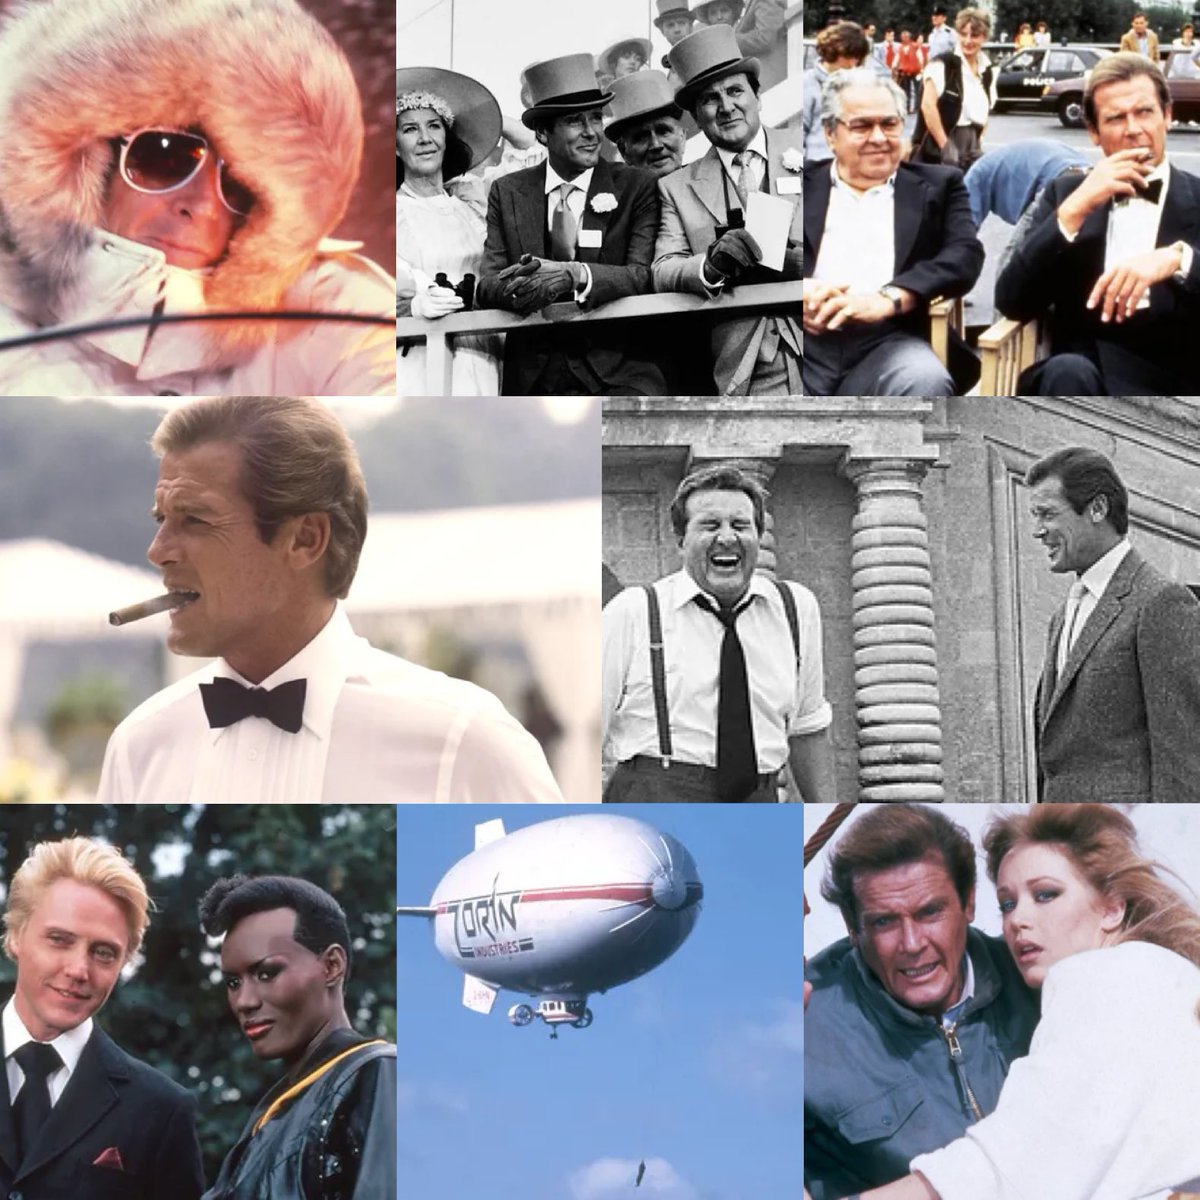 A VIEW TO A KILL is a damn good Bond film. I don’t care how old Moore is, he’s still great in the role! It has one of the best villains, awesome score, brilliant song, & multiple blimps! What more could you ask for?

#JamesBond ⚪️⚪️⚪️🔴